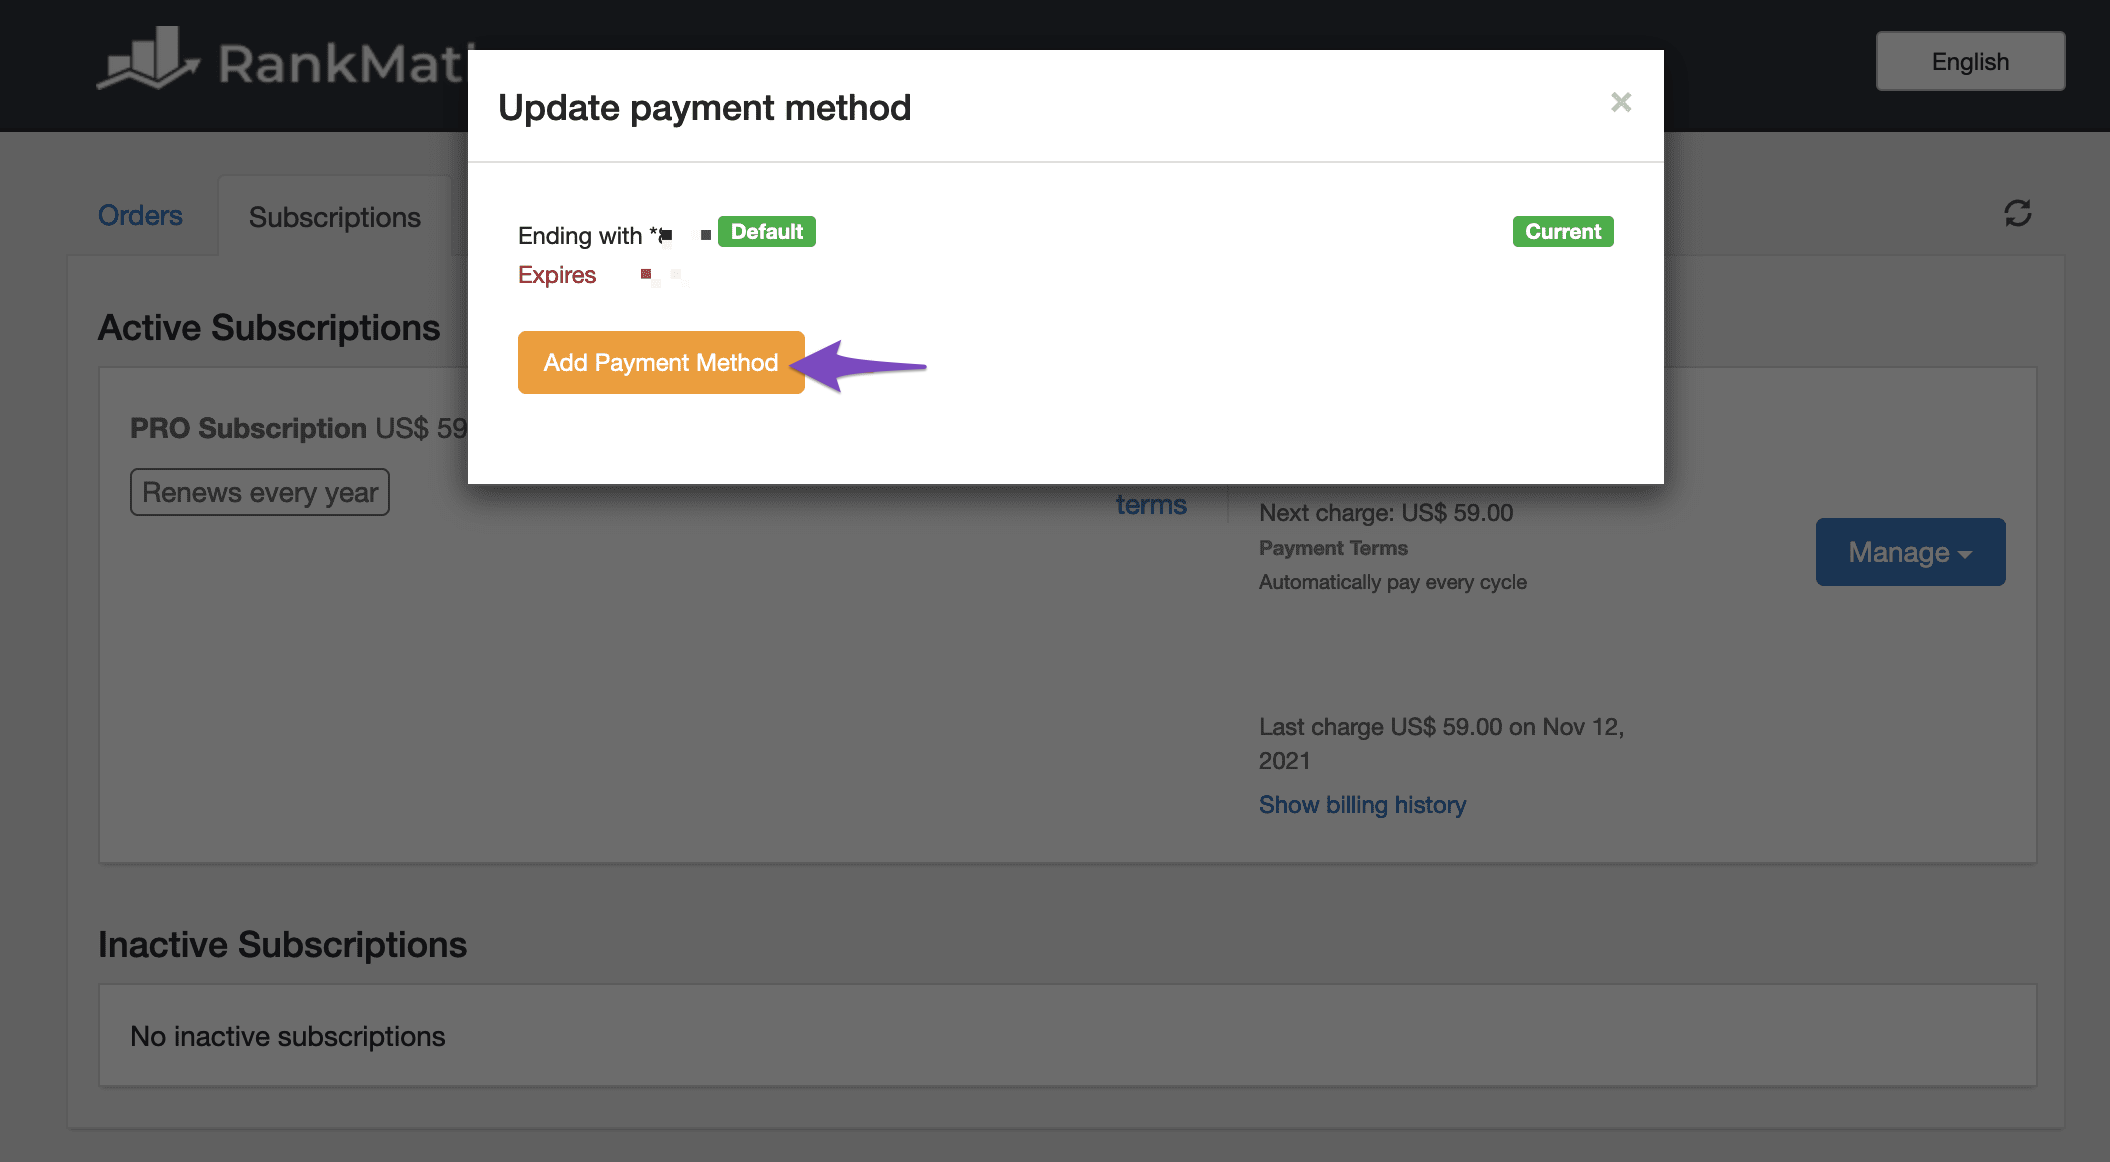 Choose Add Payment Method in the popup